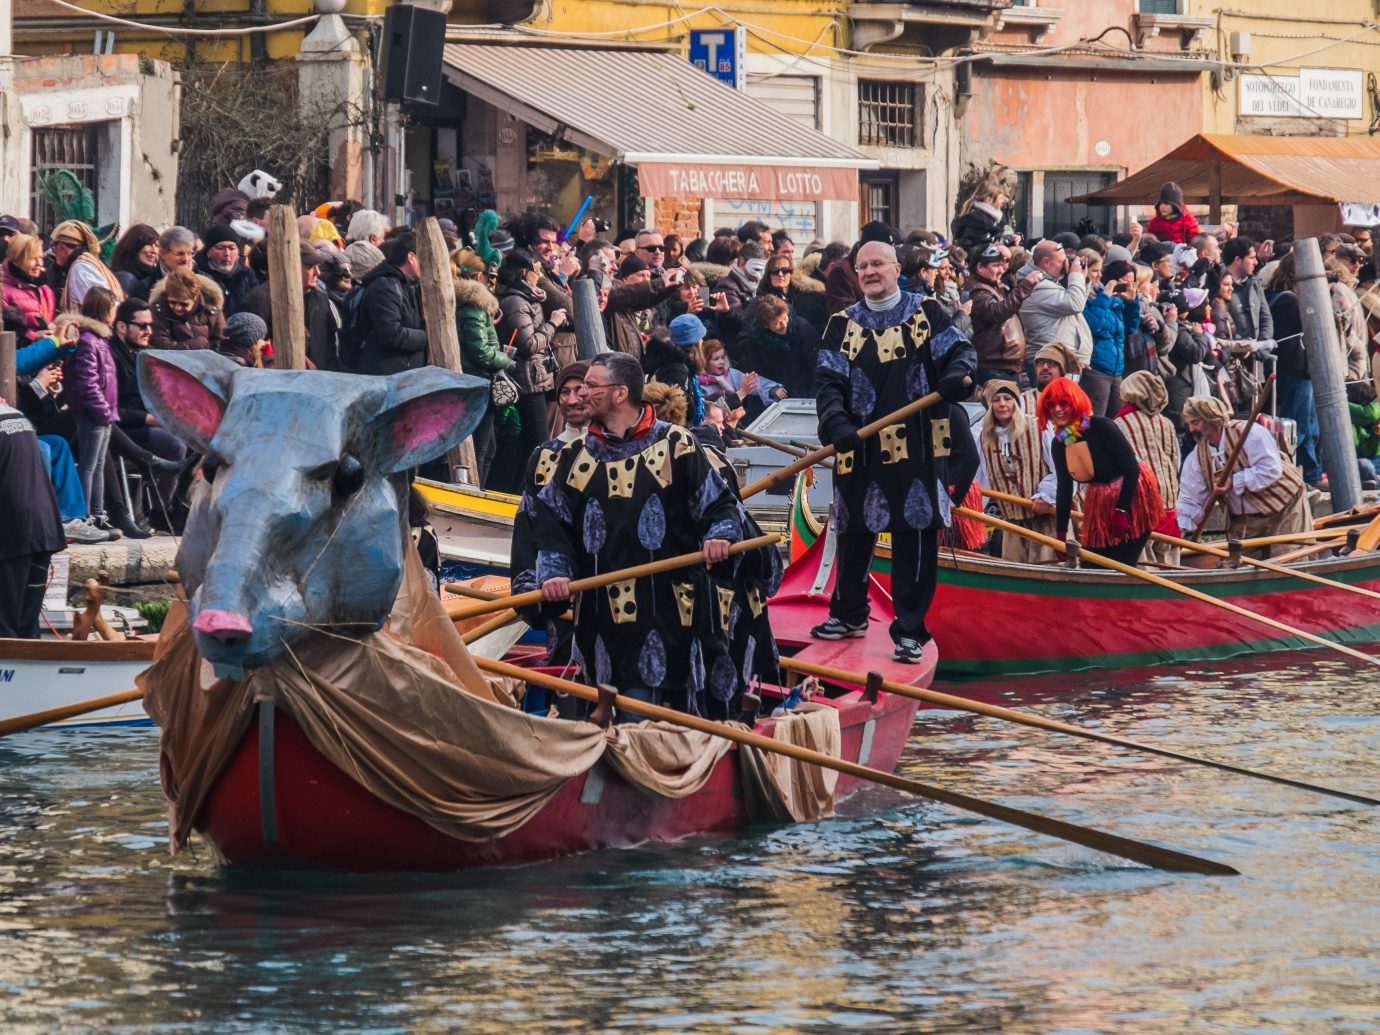 People dress up and row decorative boats in Venice